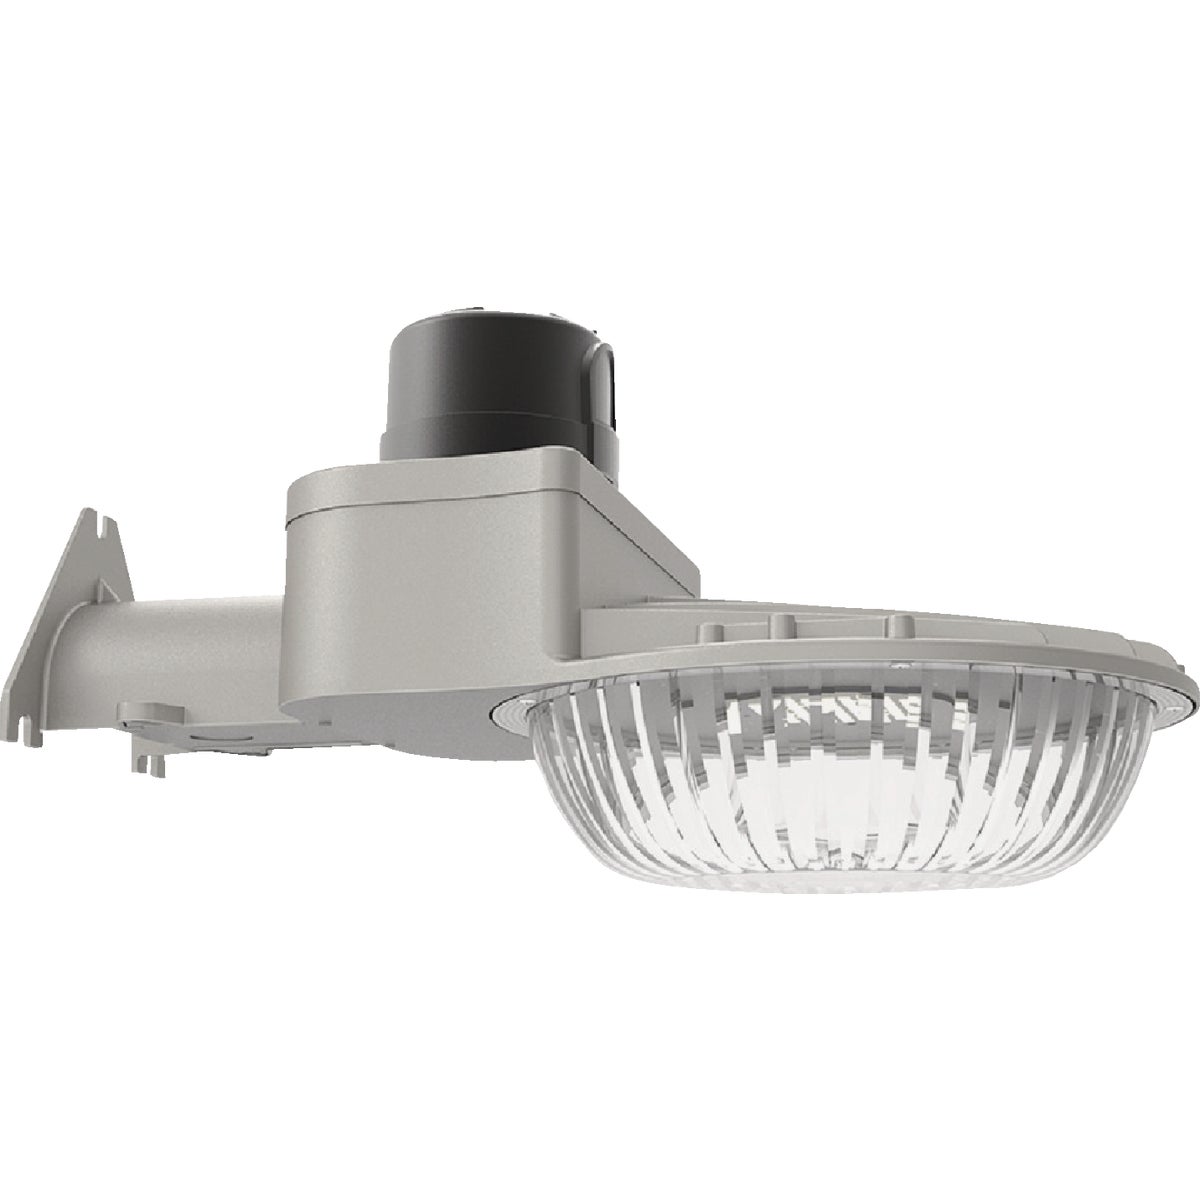 Halo Gray Dusk To Dawn LED Outdoor Area Light Fixture, Selectable Lumen, Selectable Color Temperature